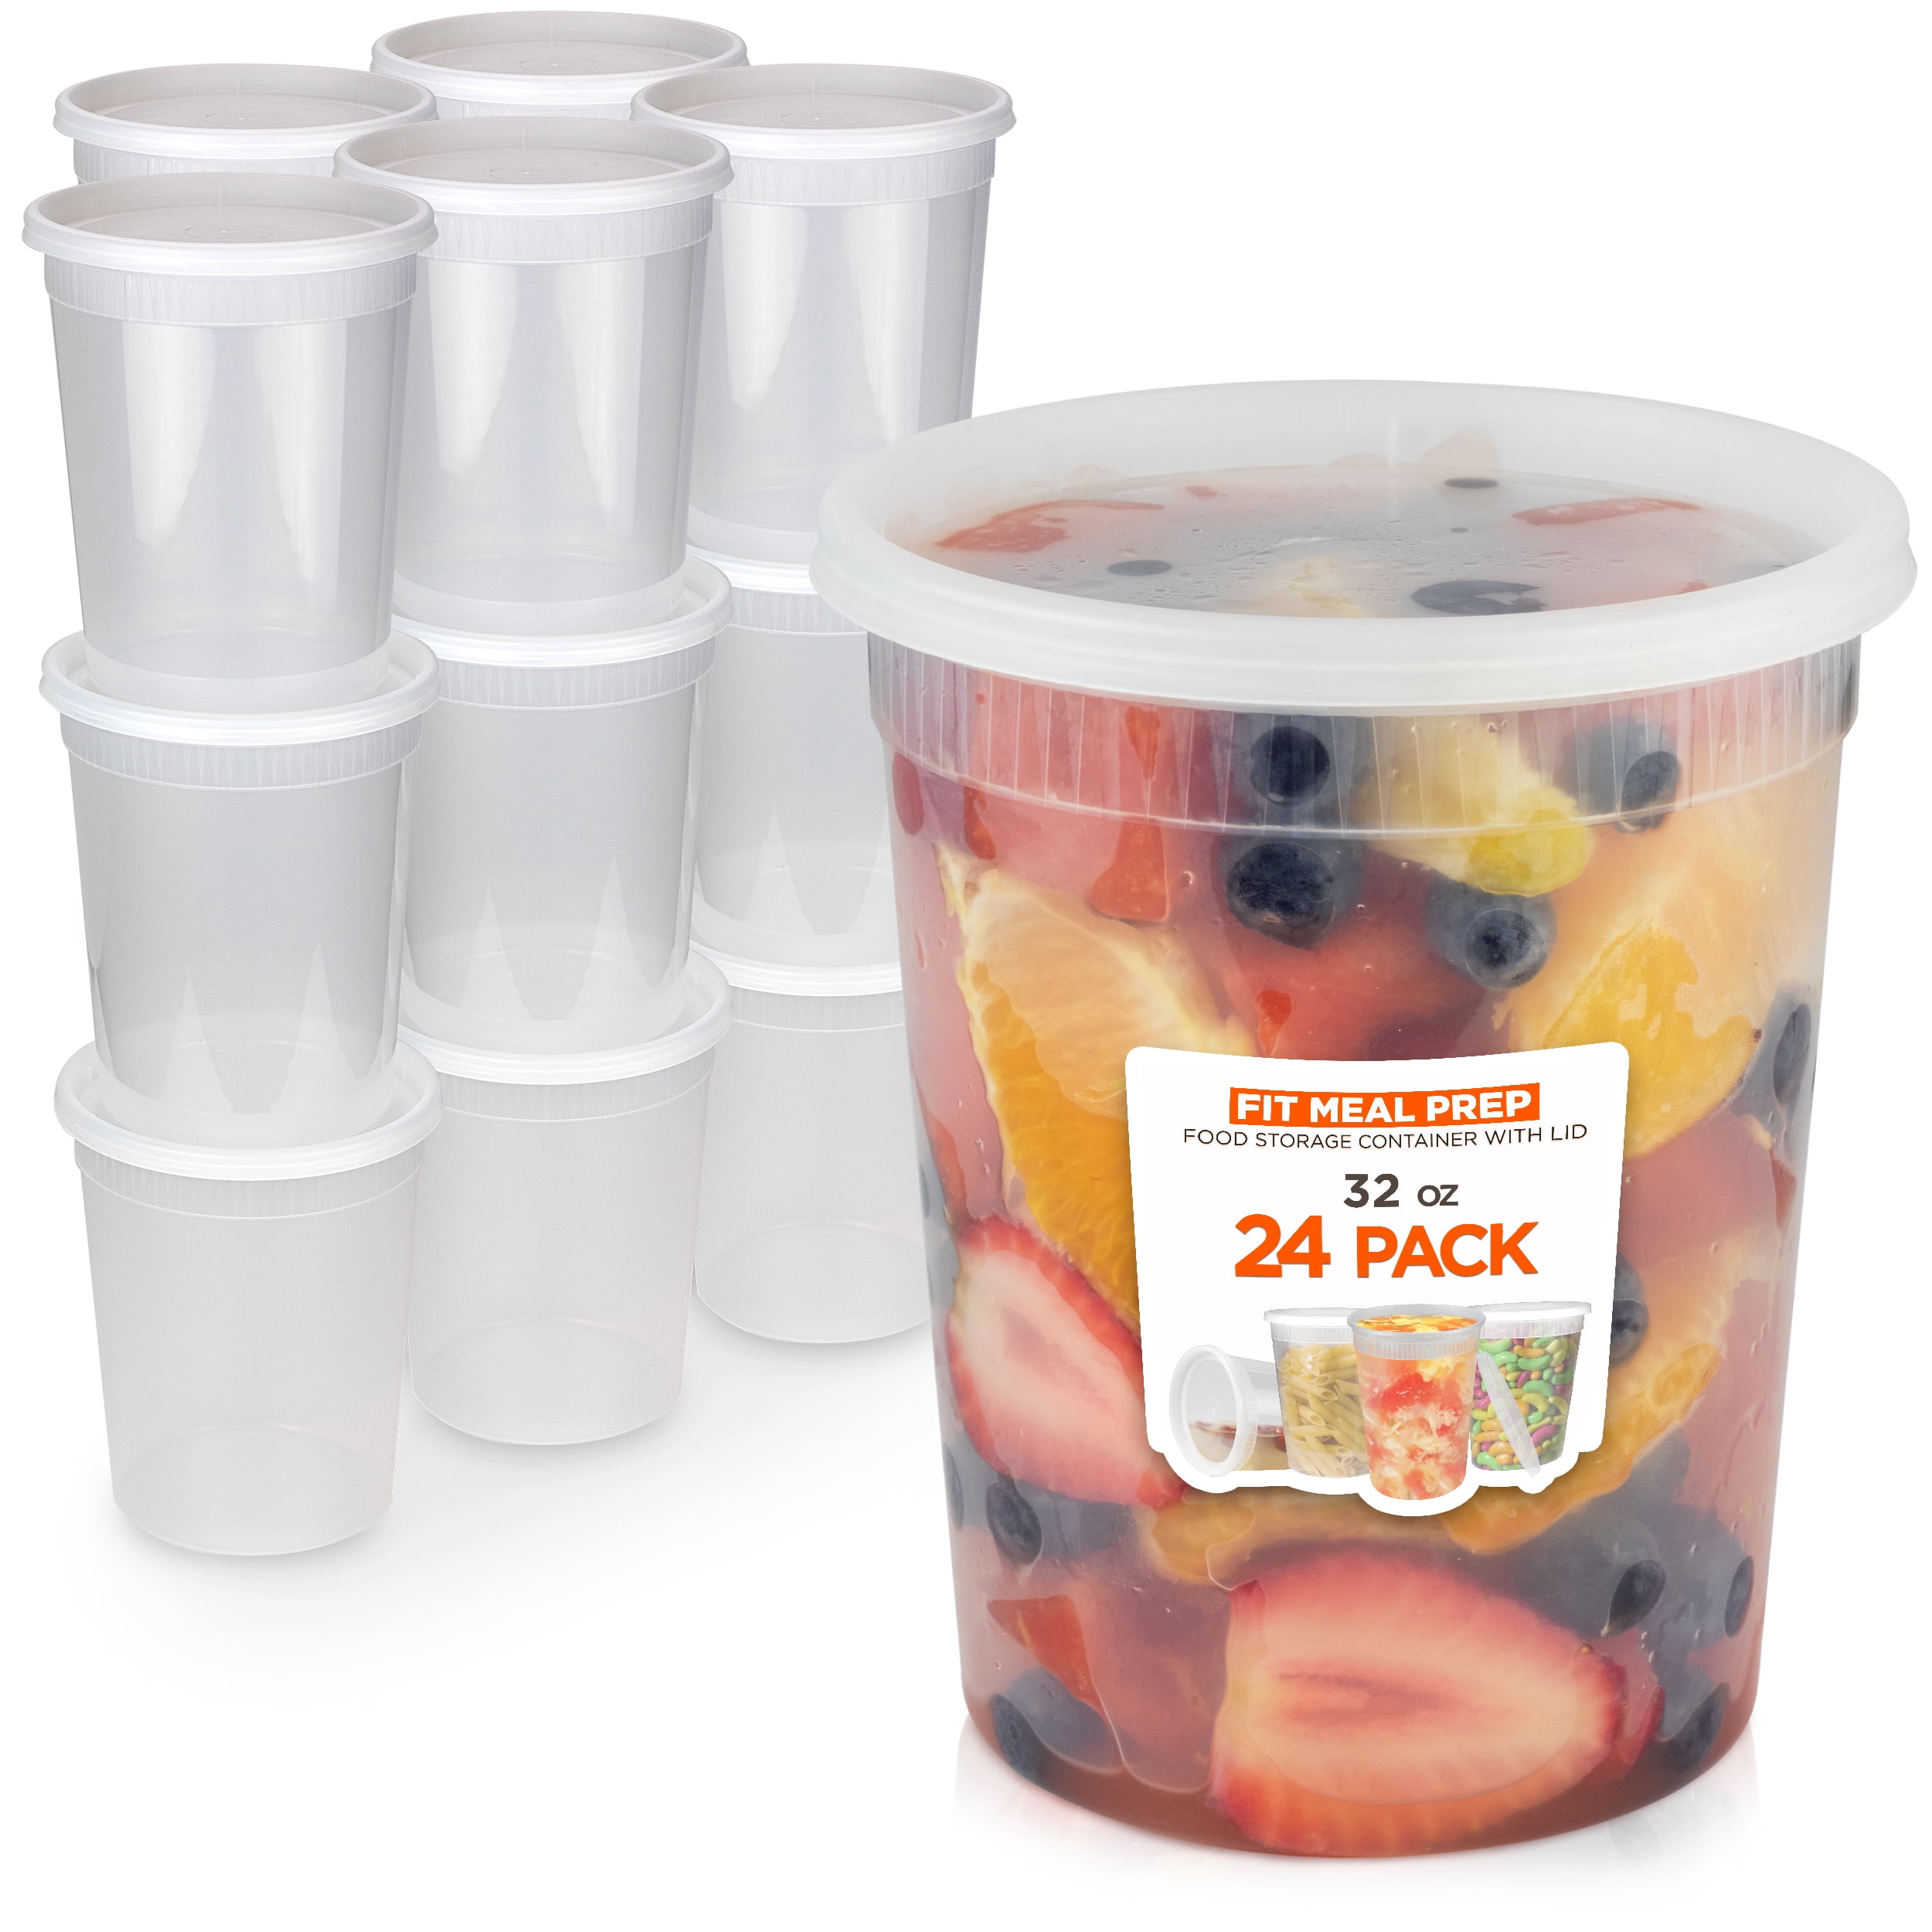 Deli Food Storage Containers With Lids 32 Ounce Quart Pack of 24 ... DuraHome 